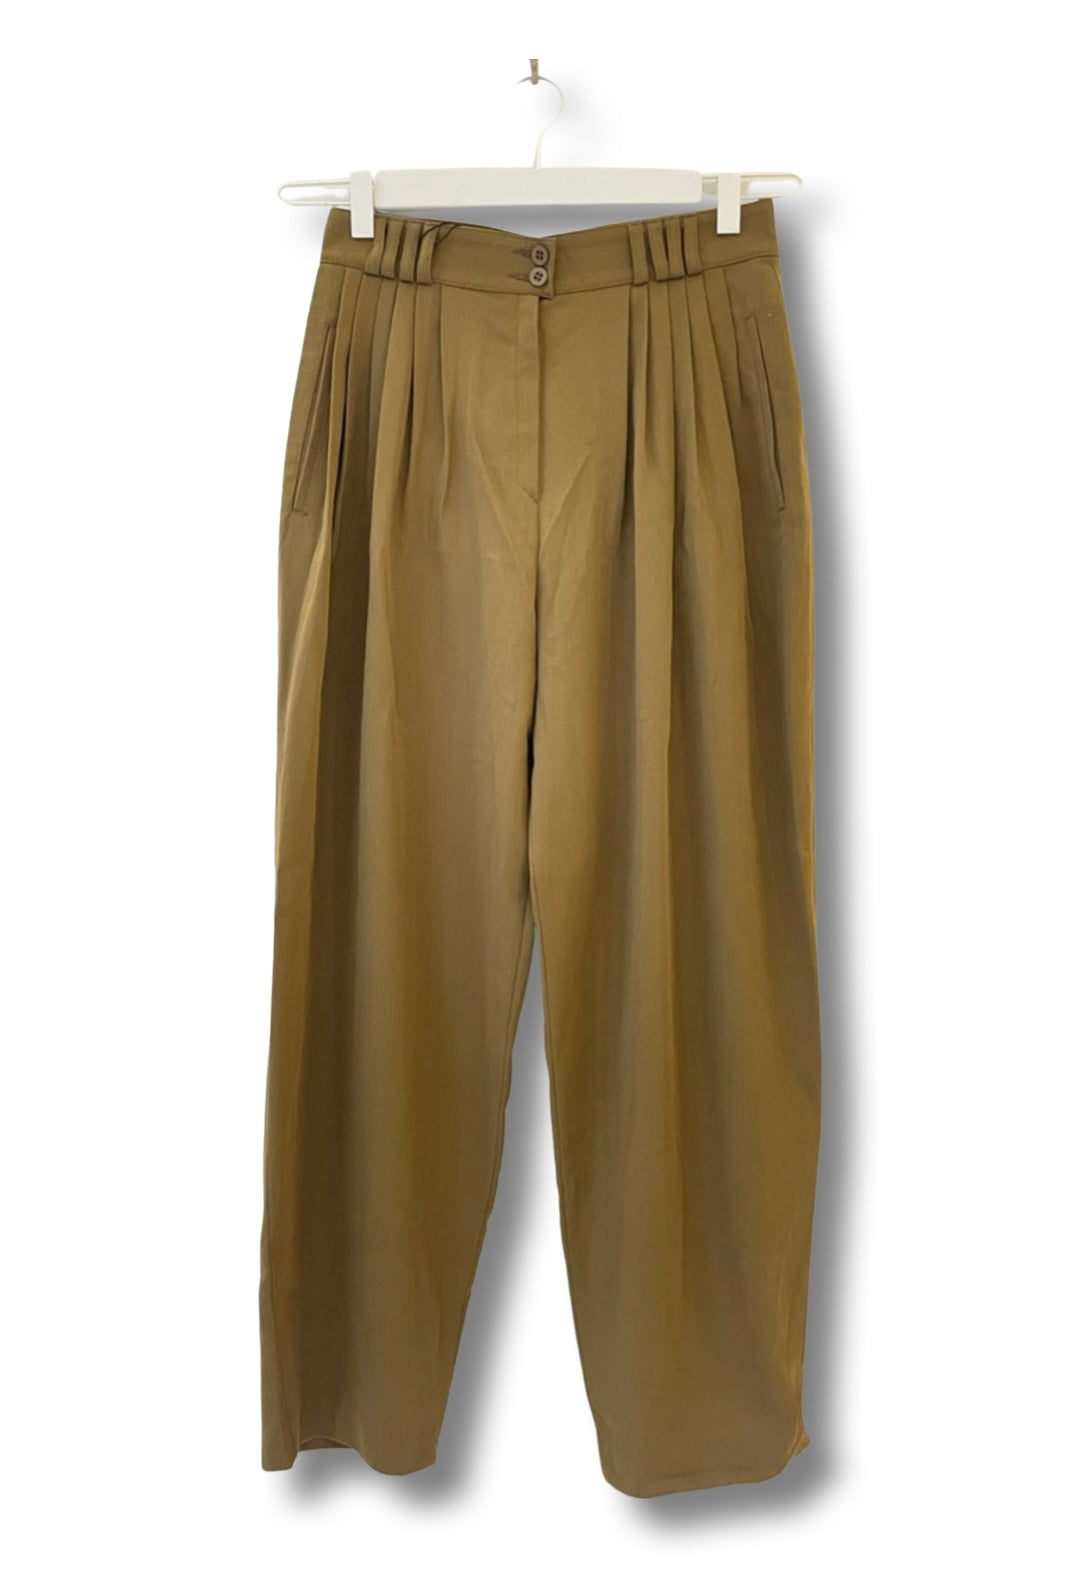 Curry pleated pants.